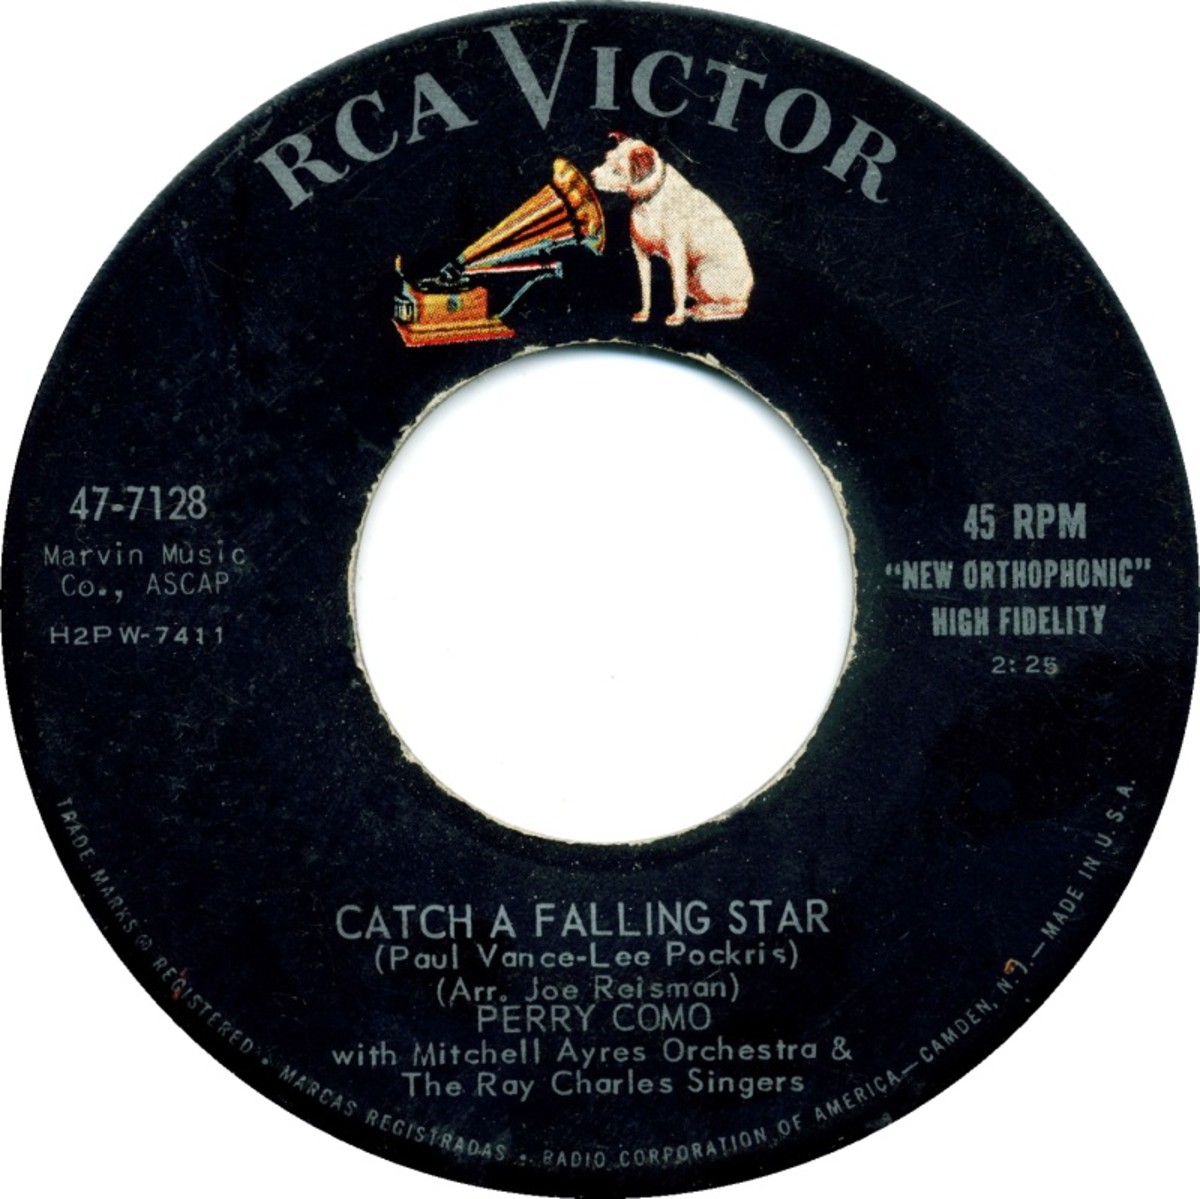 Paul Vance co-wrote "Catch a Falling Star"